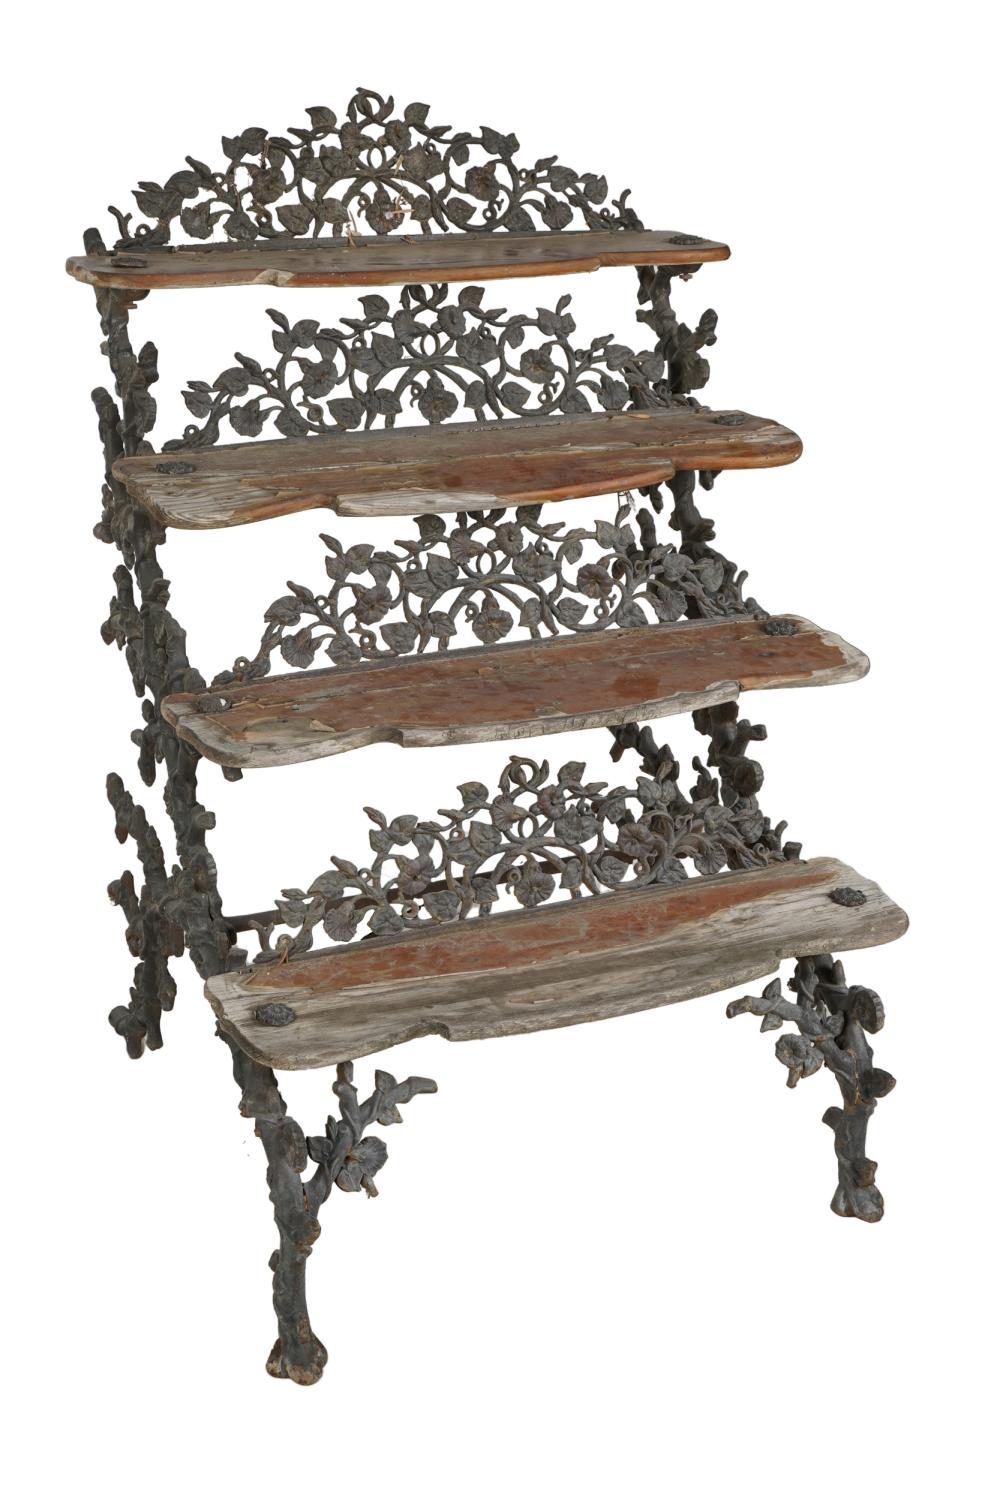 IRON & WOOD TIERED PLANT STANDwith